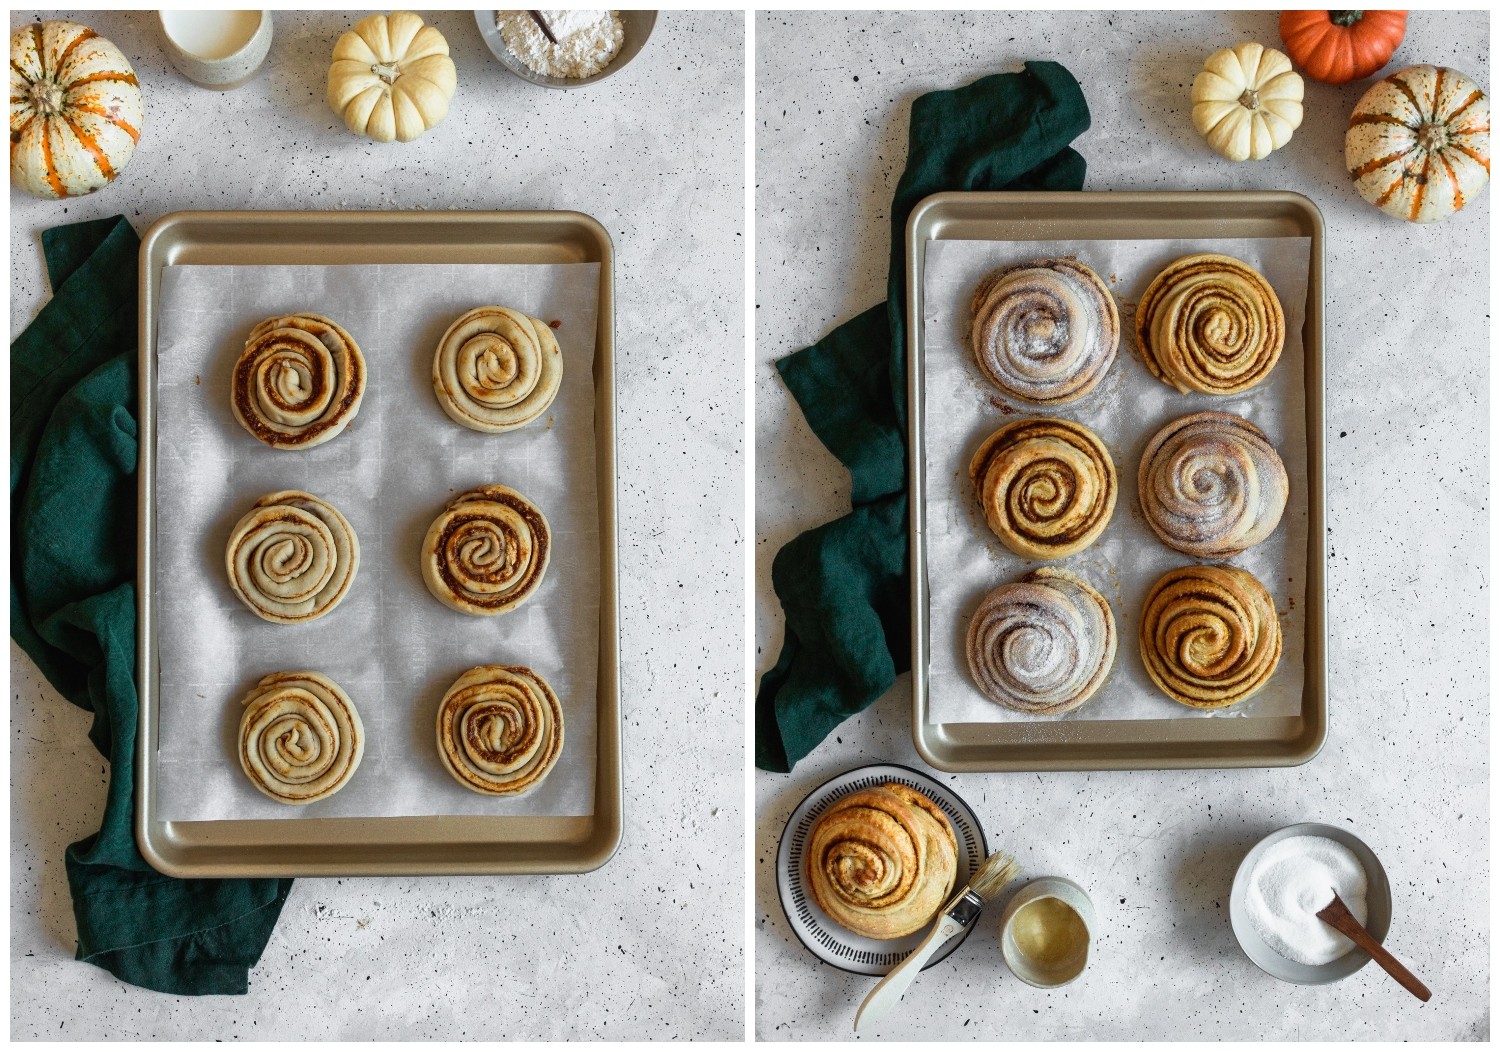 Two photos of pumpkin morning buns on gold baking sheets on a grey table. On the left, the raw rolls are surrounded by pumpkins and a linen. On the right, the baked rolls are being brushed with butter and sprinkled with sugar.